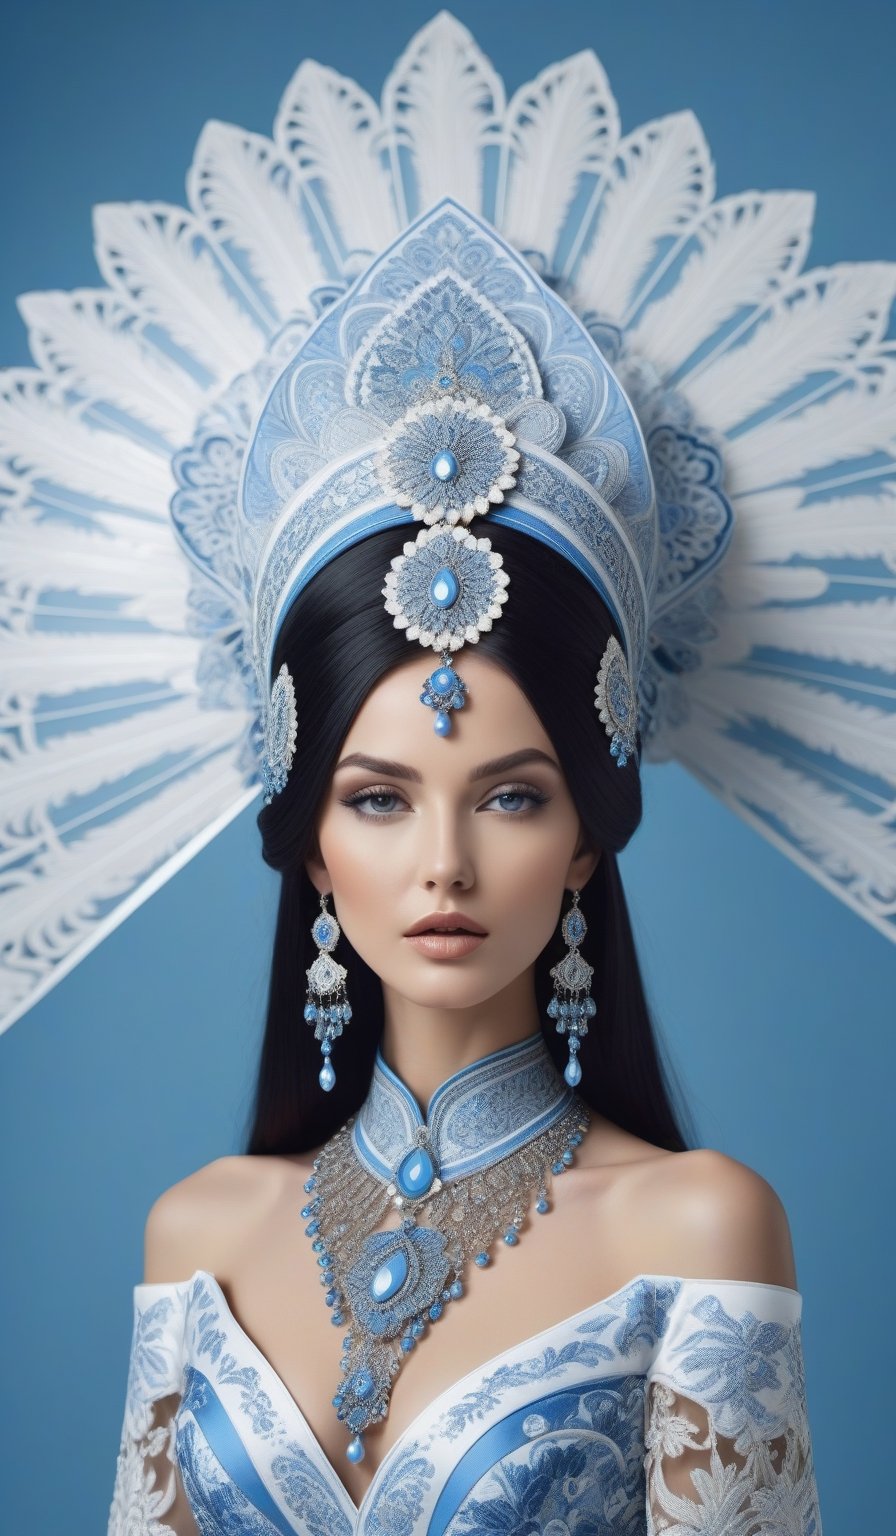 elegant, graceful female model with long black hair, in an intricate headdress and extravagant outfit, complex gzhel patterns (blue, light blue, white), neutral background, bright lighting, contrasting shadows and lights, clear details, realism, photo quality